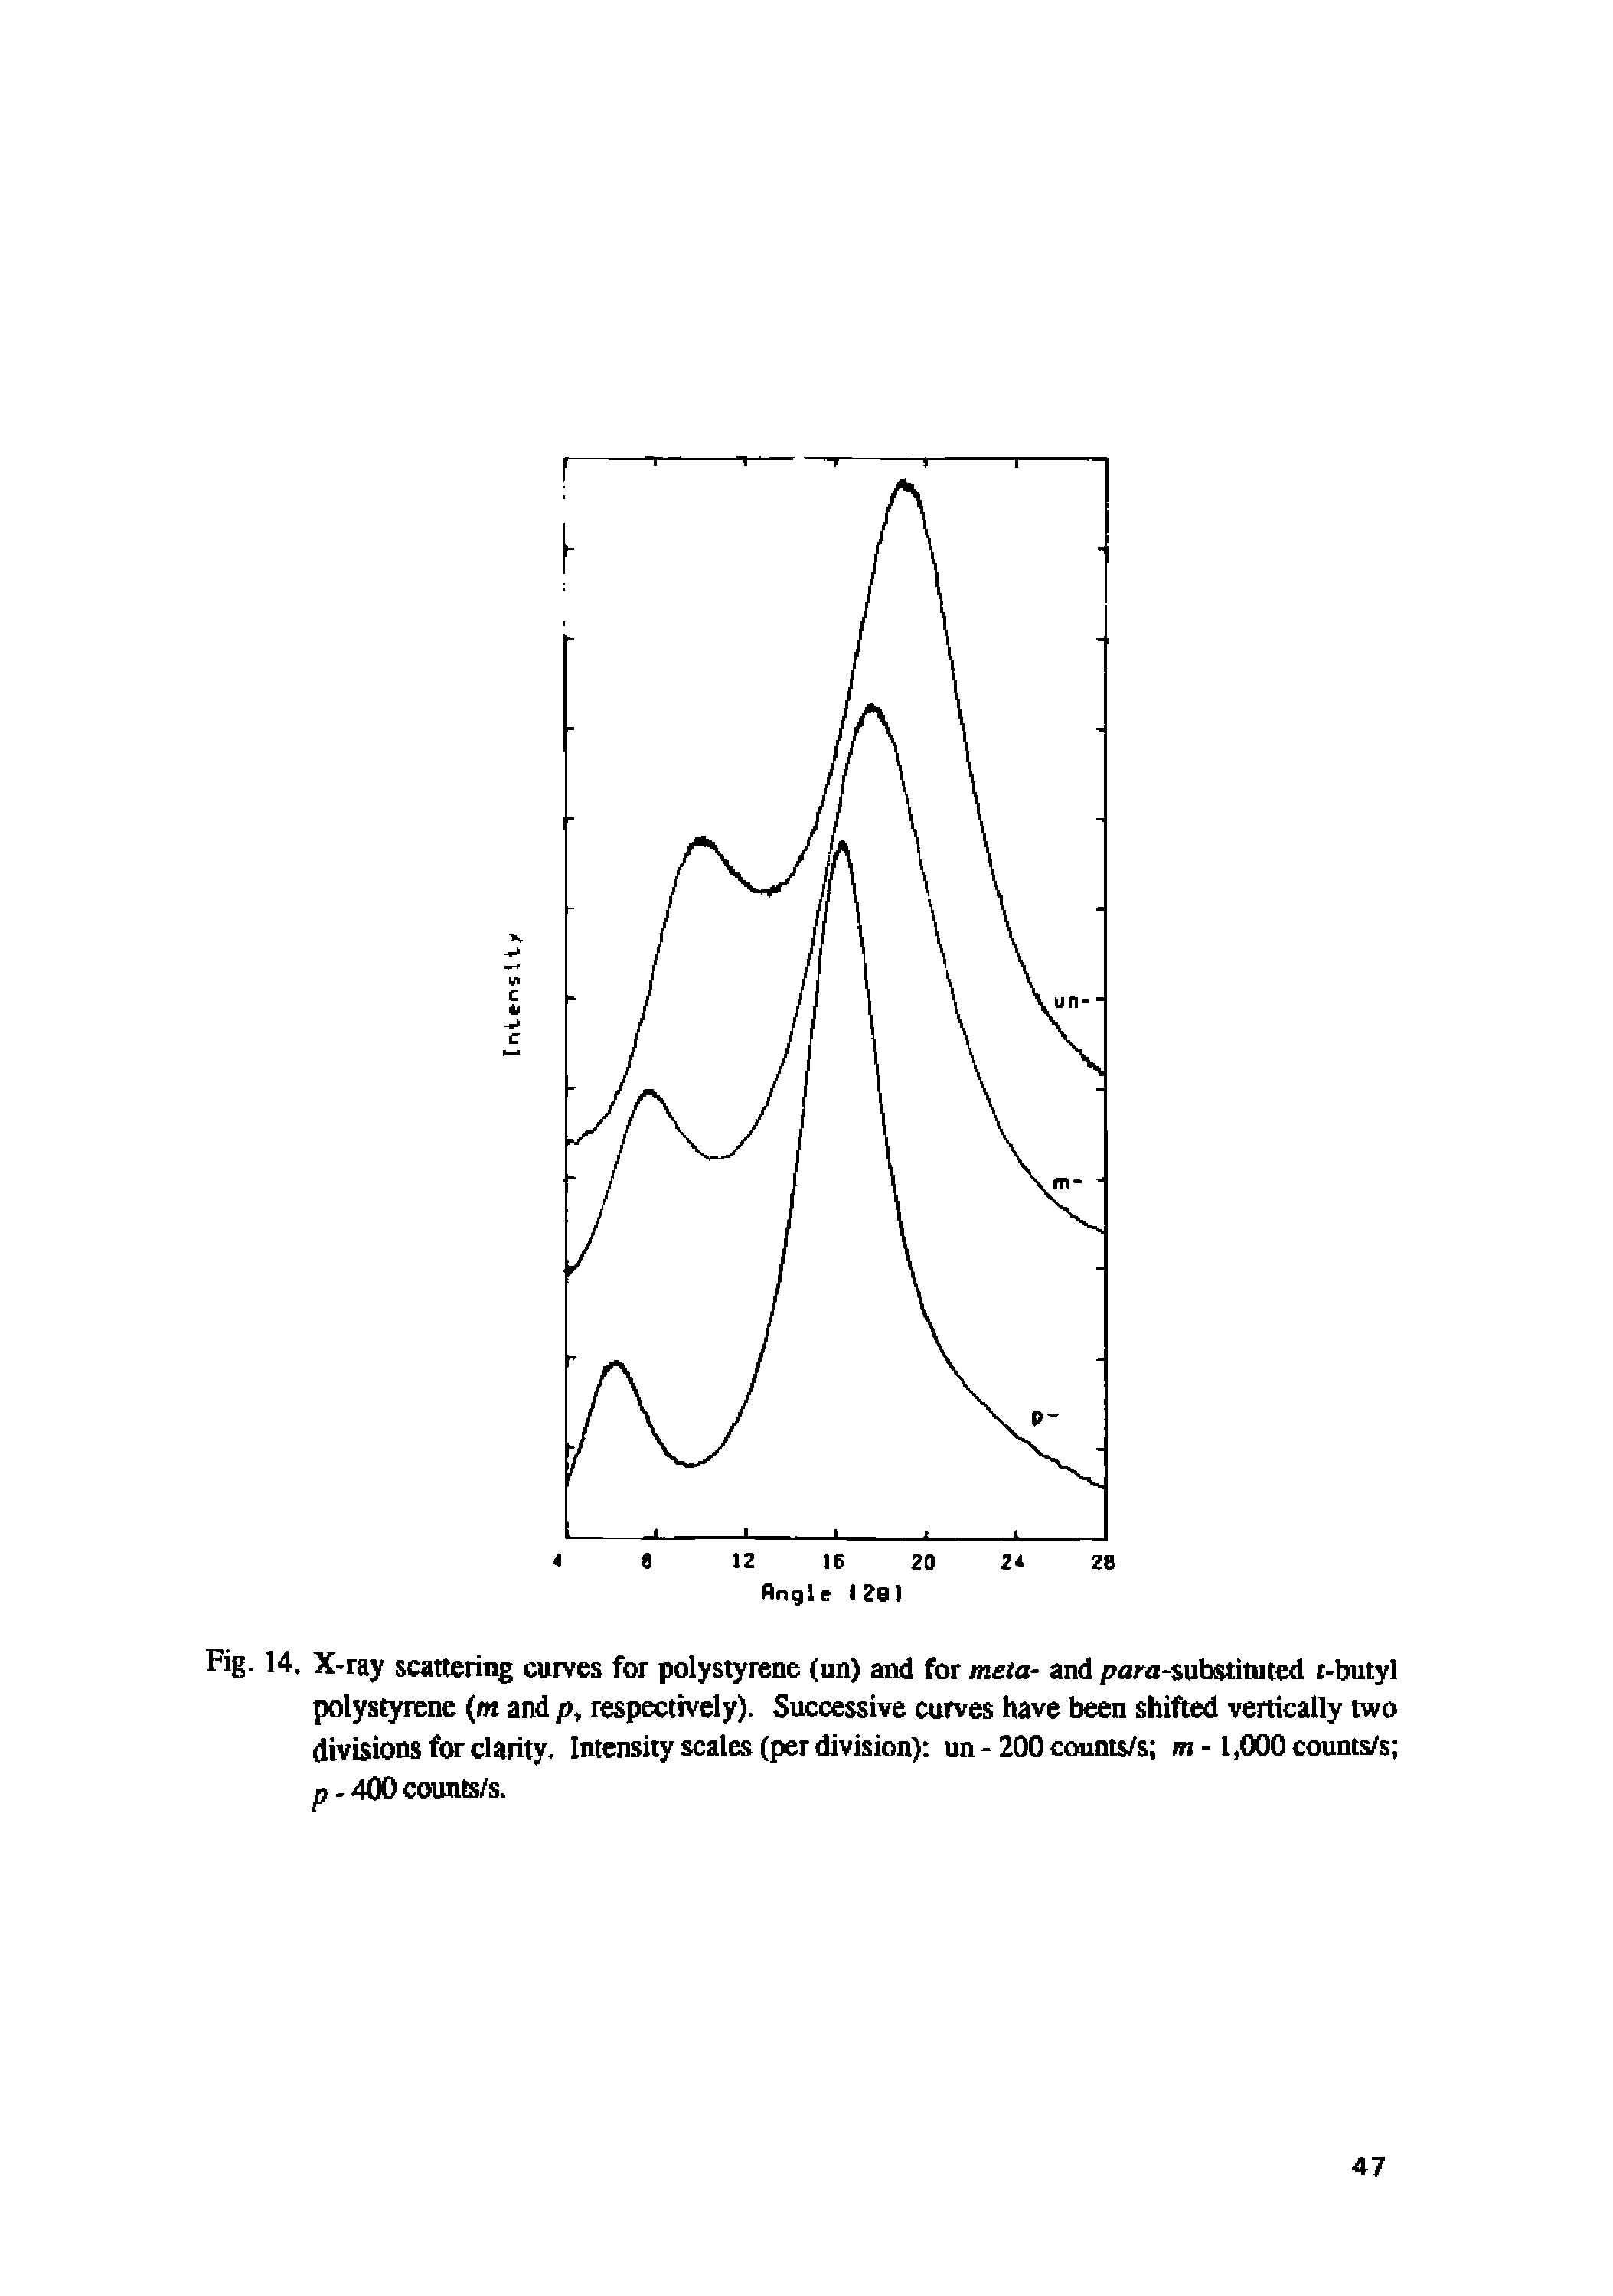 Fig. 14. X-ray scattering curves for polystyrene (un) and for meta- and para-substituted t-butyl polystyrene (m and p, respectively). Successive curves have been shifted vertically two divisions for clarity. Intensity scales (per division) un - 200 counts/s m -1,000 counts/s p - 400 counts/s.